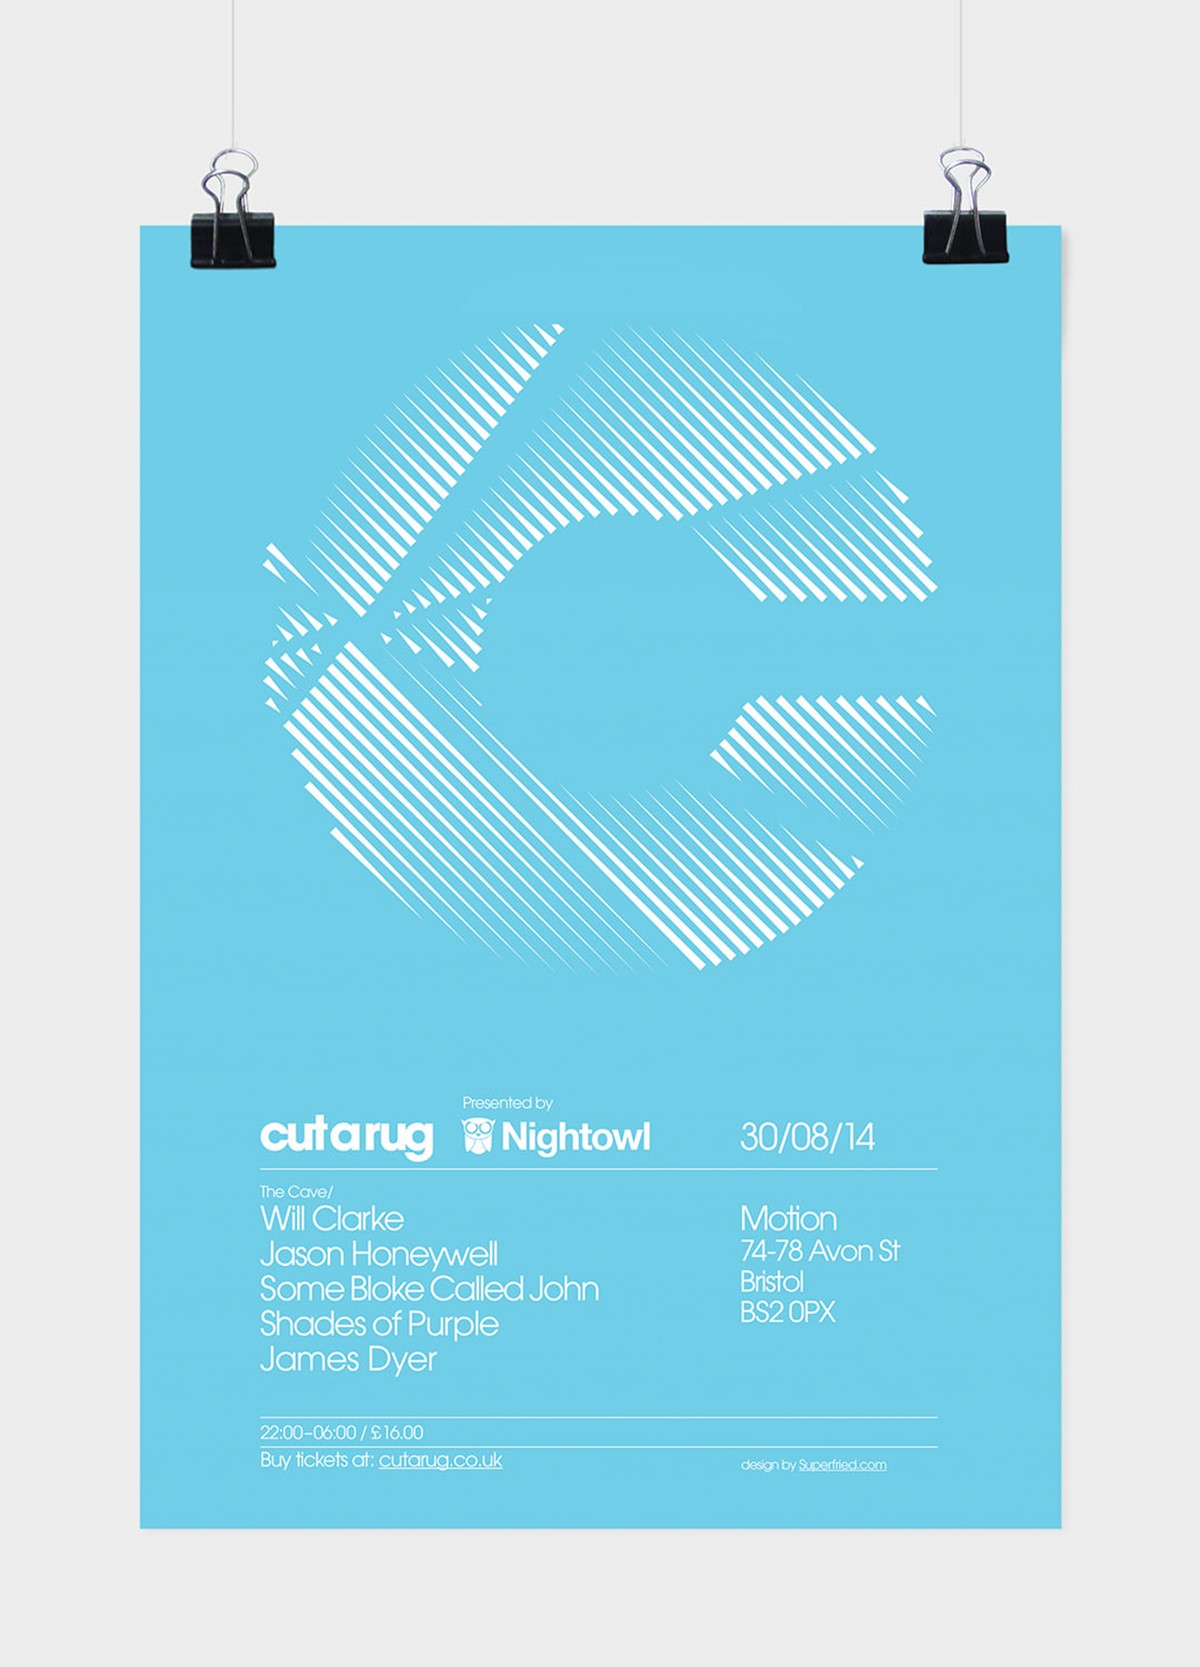 Cut a Rug. Geometric shard style C logo club night poster. Design by Superfried. Manchester.